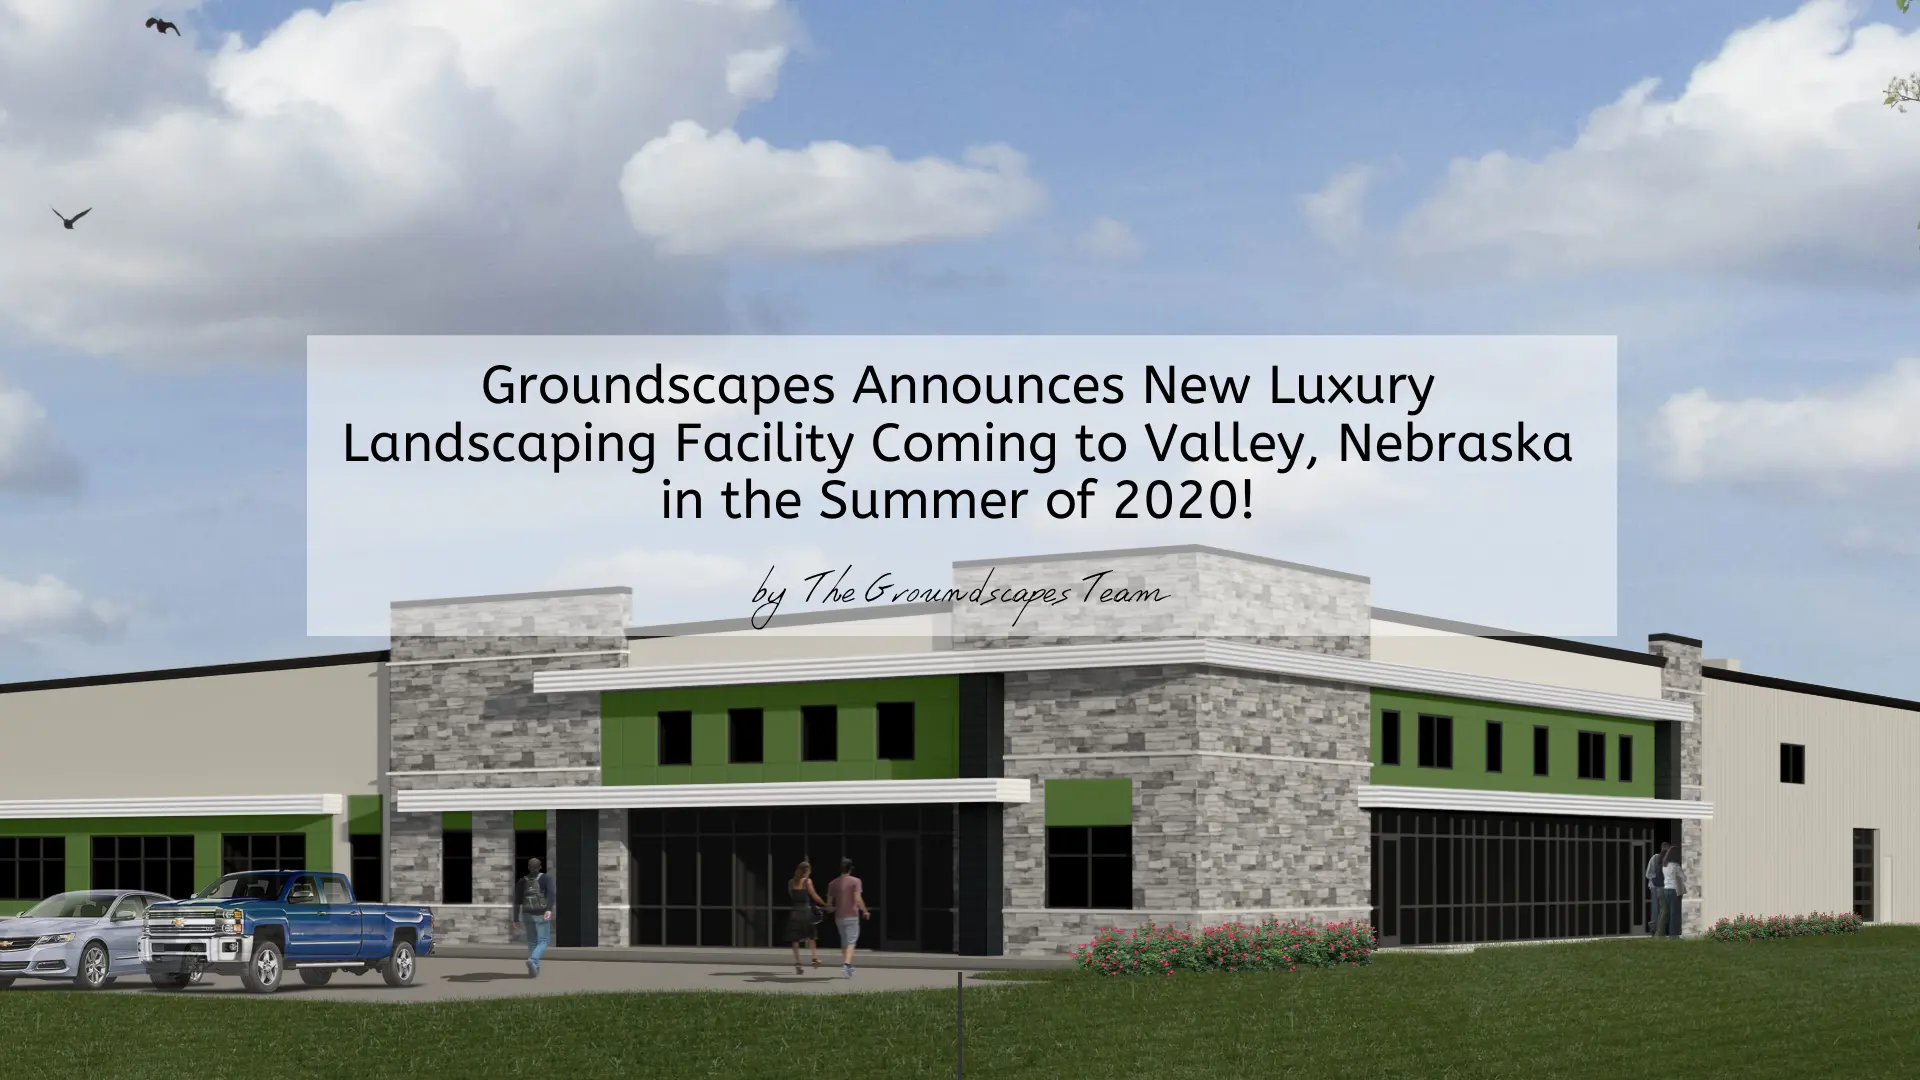 Groundscapes Announces New Luxury Landscaping Facility Coming to Valley, Nebraska for Summer 2020!